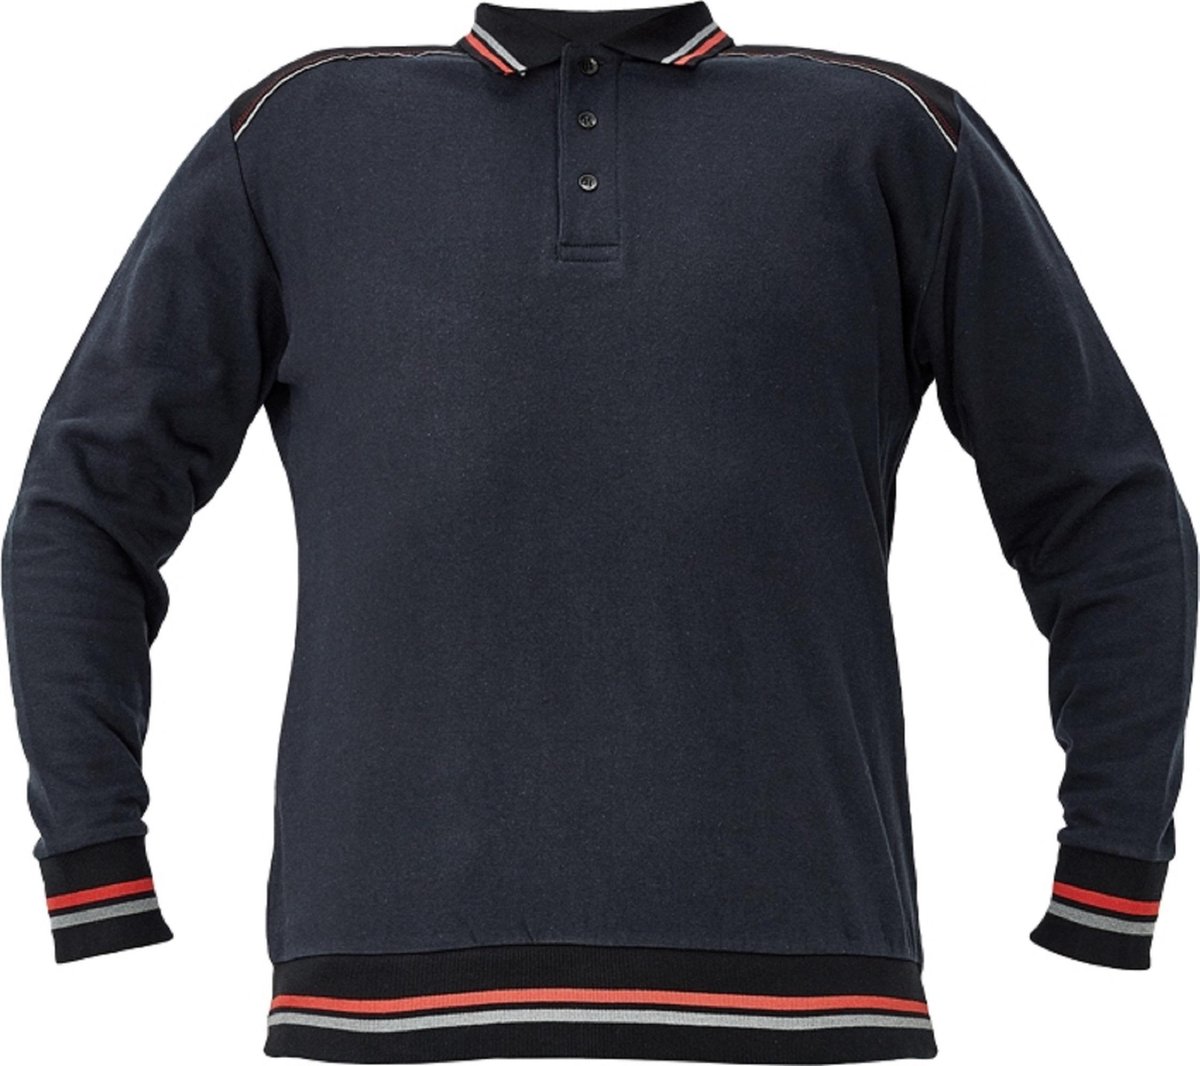 Knoxfield Polo-Sweater antraciet/rood L